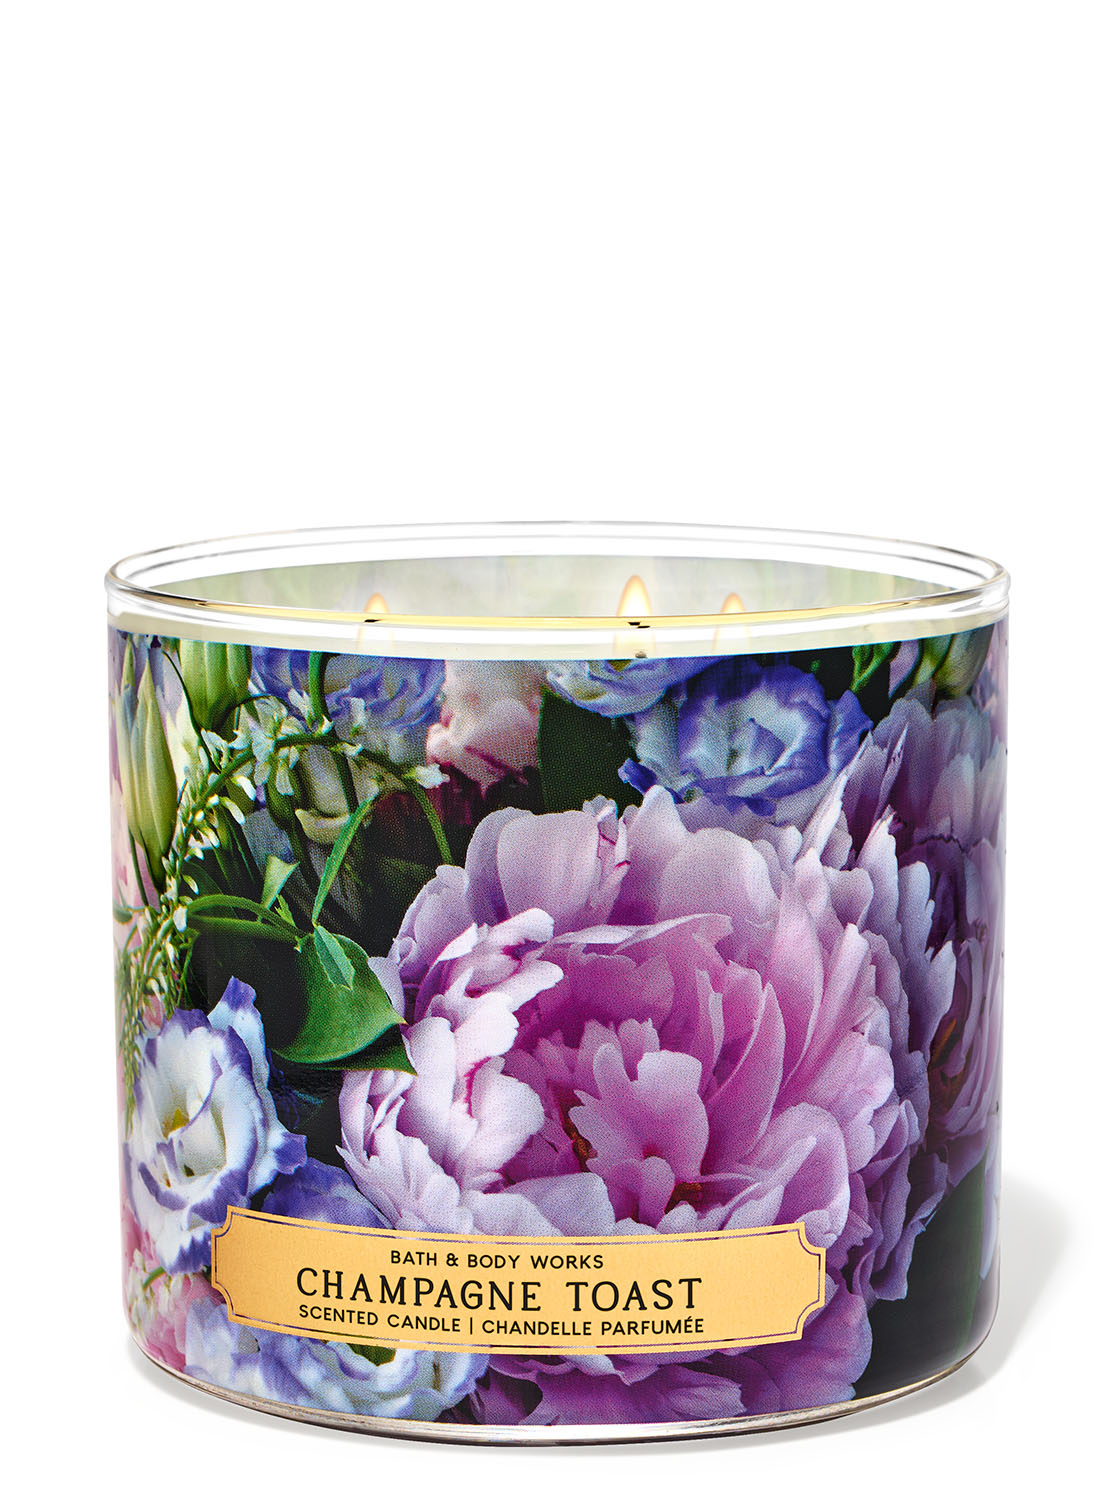 Champagne Toast 3-Wick Candle | Bath and Body Works